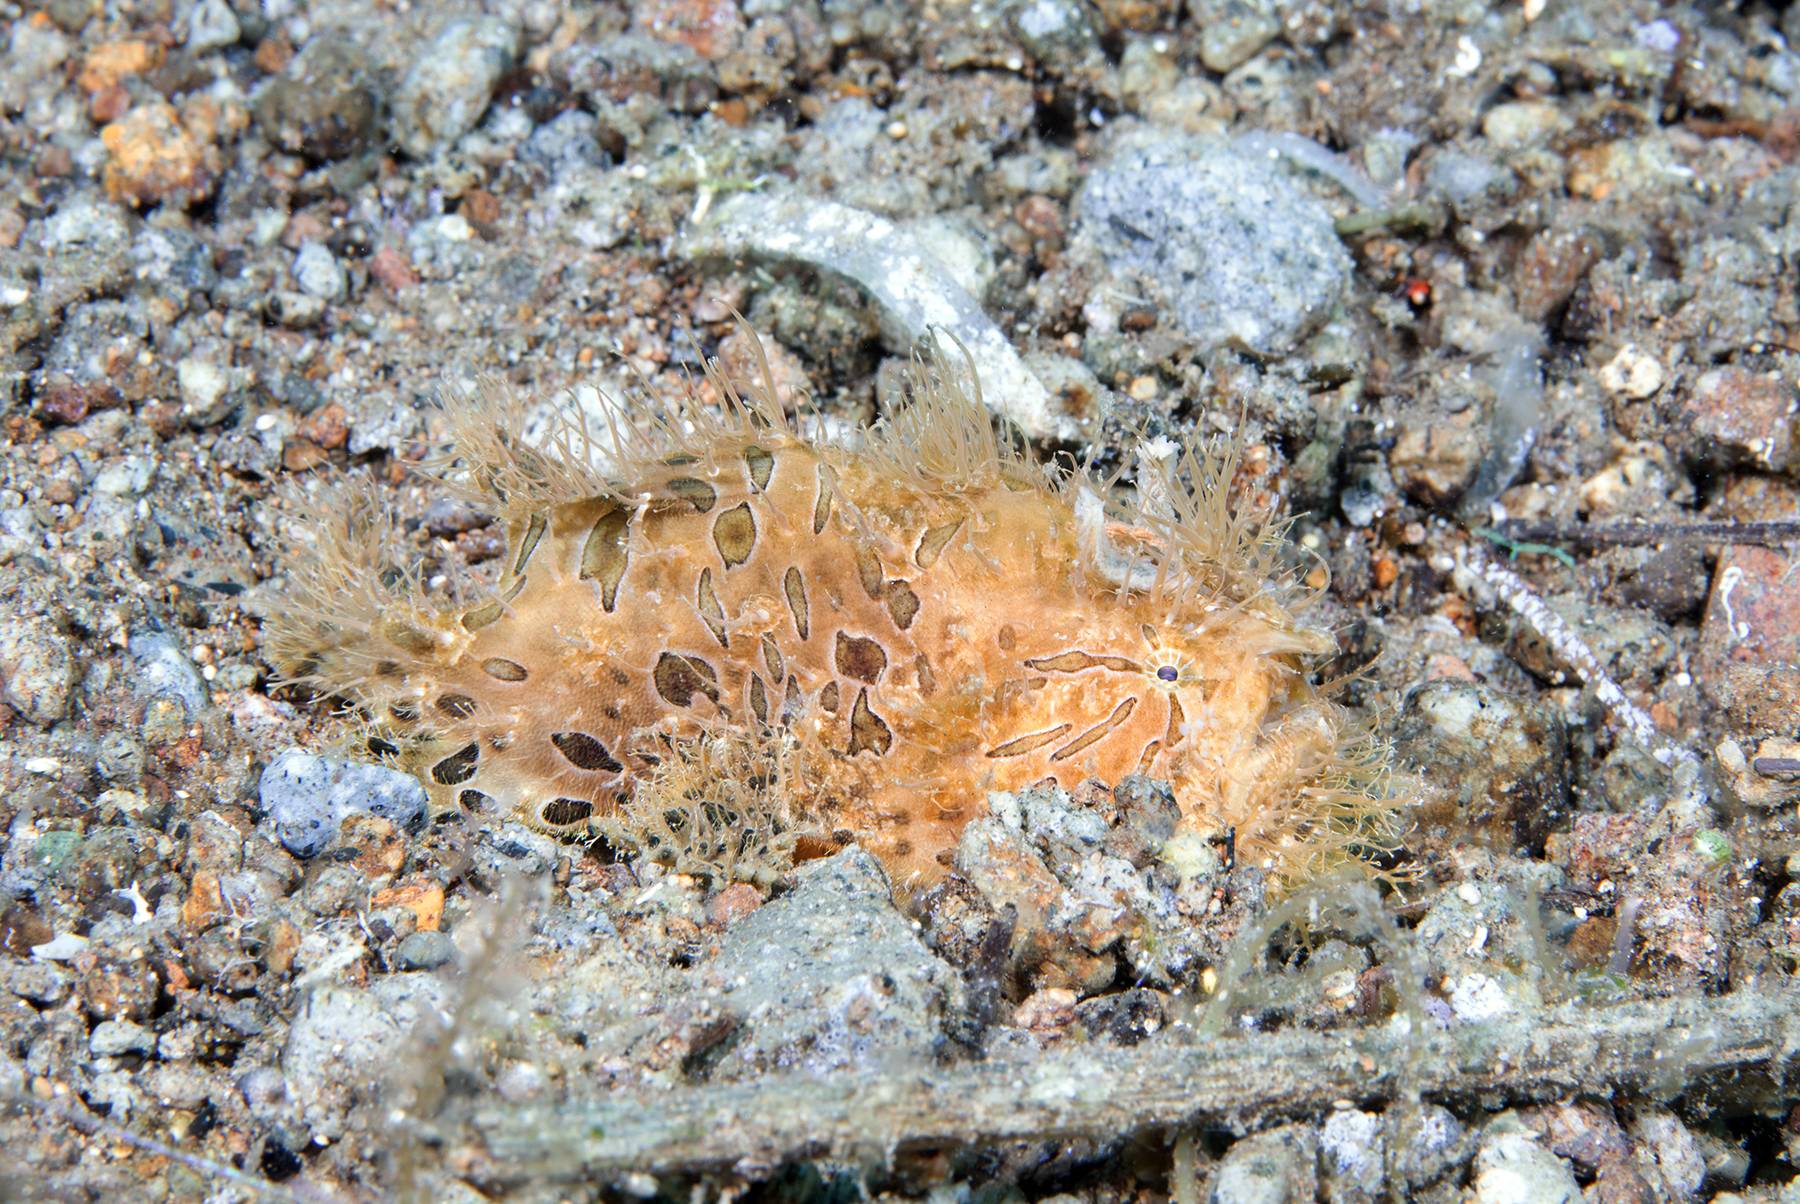 Hairy Frogfish in Reef Rubble